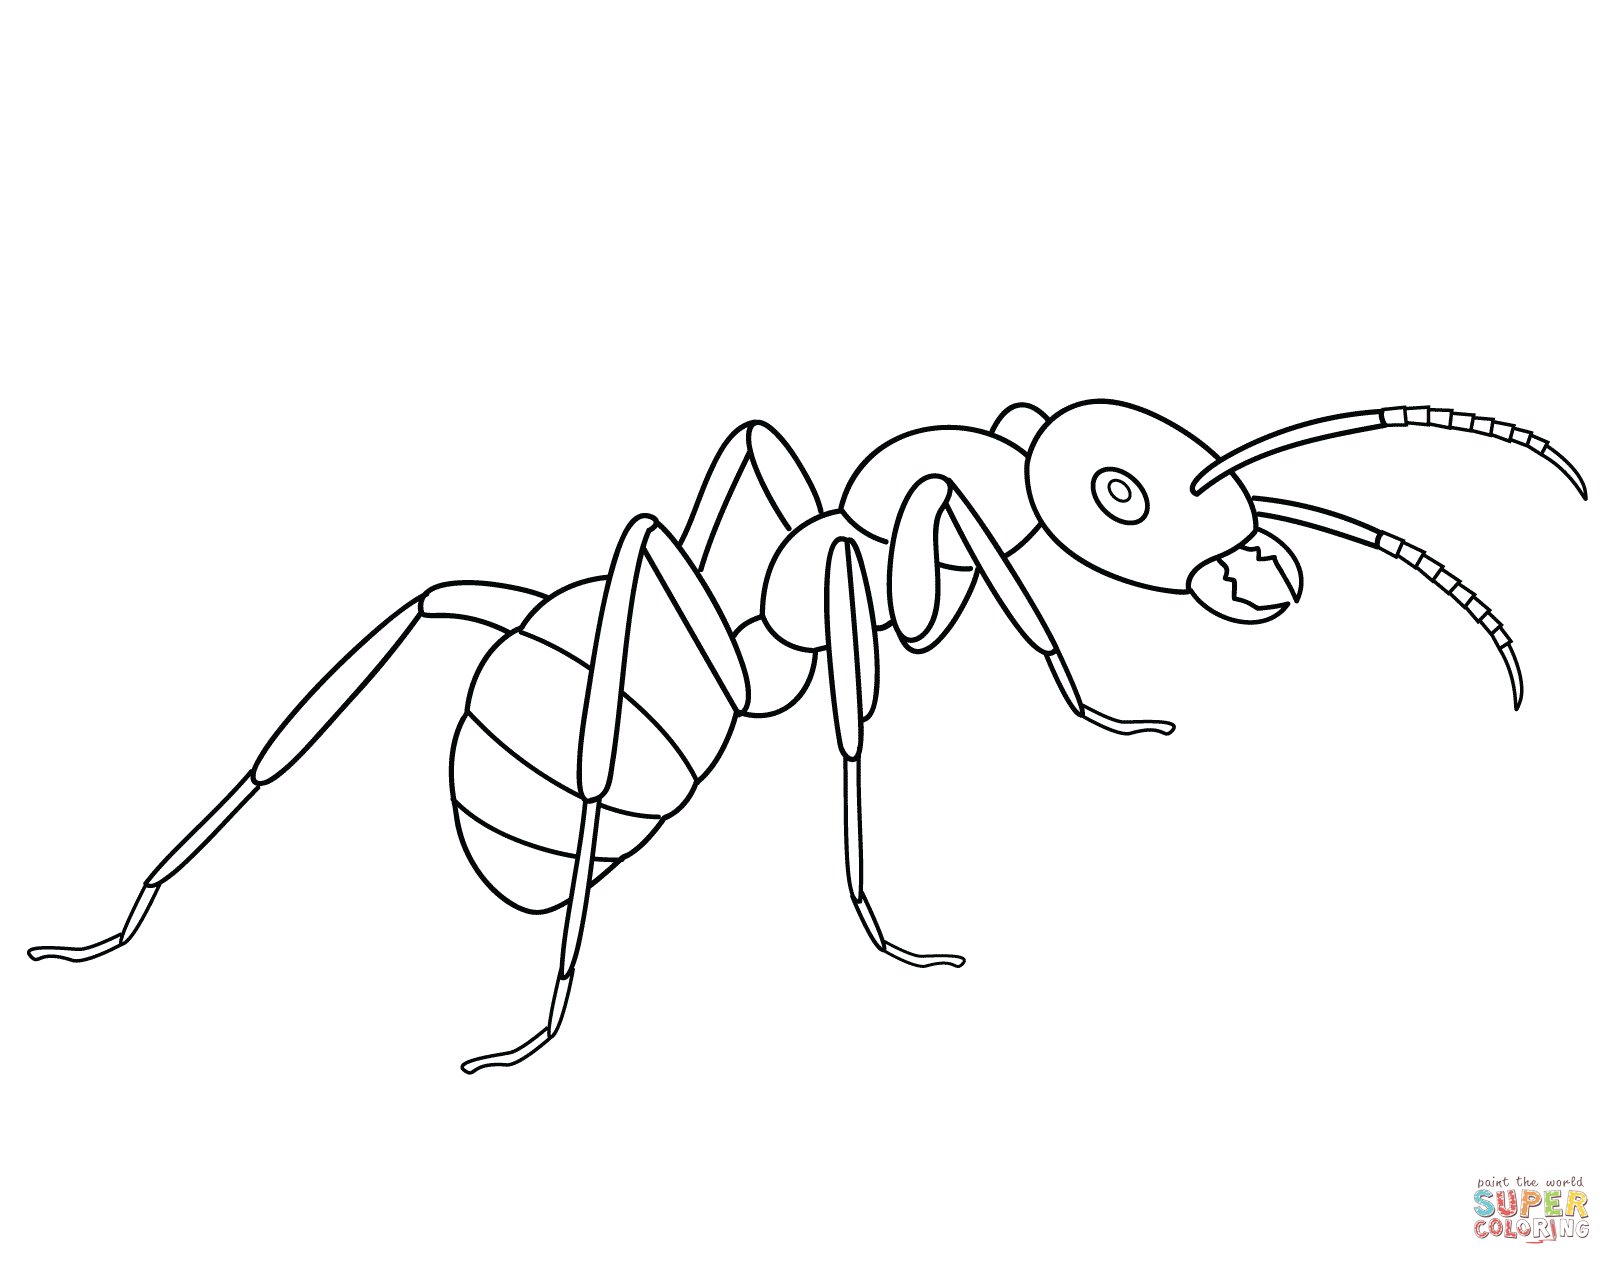 Ants coloring pages